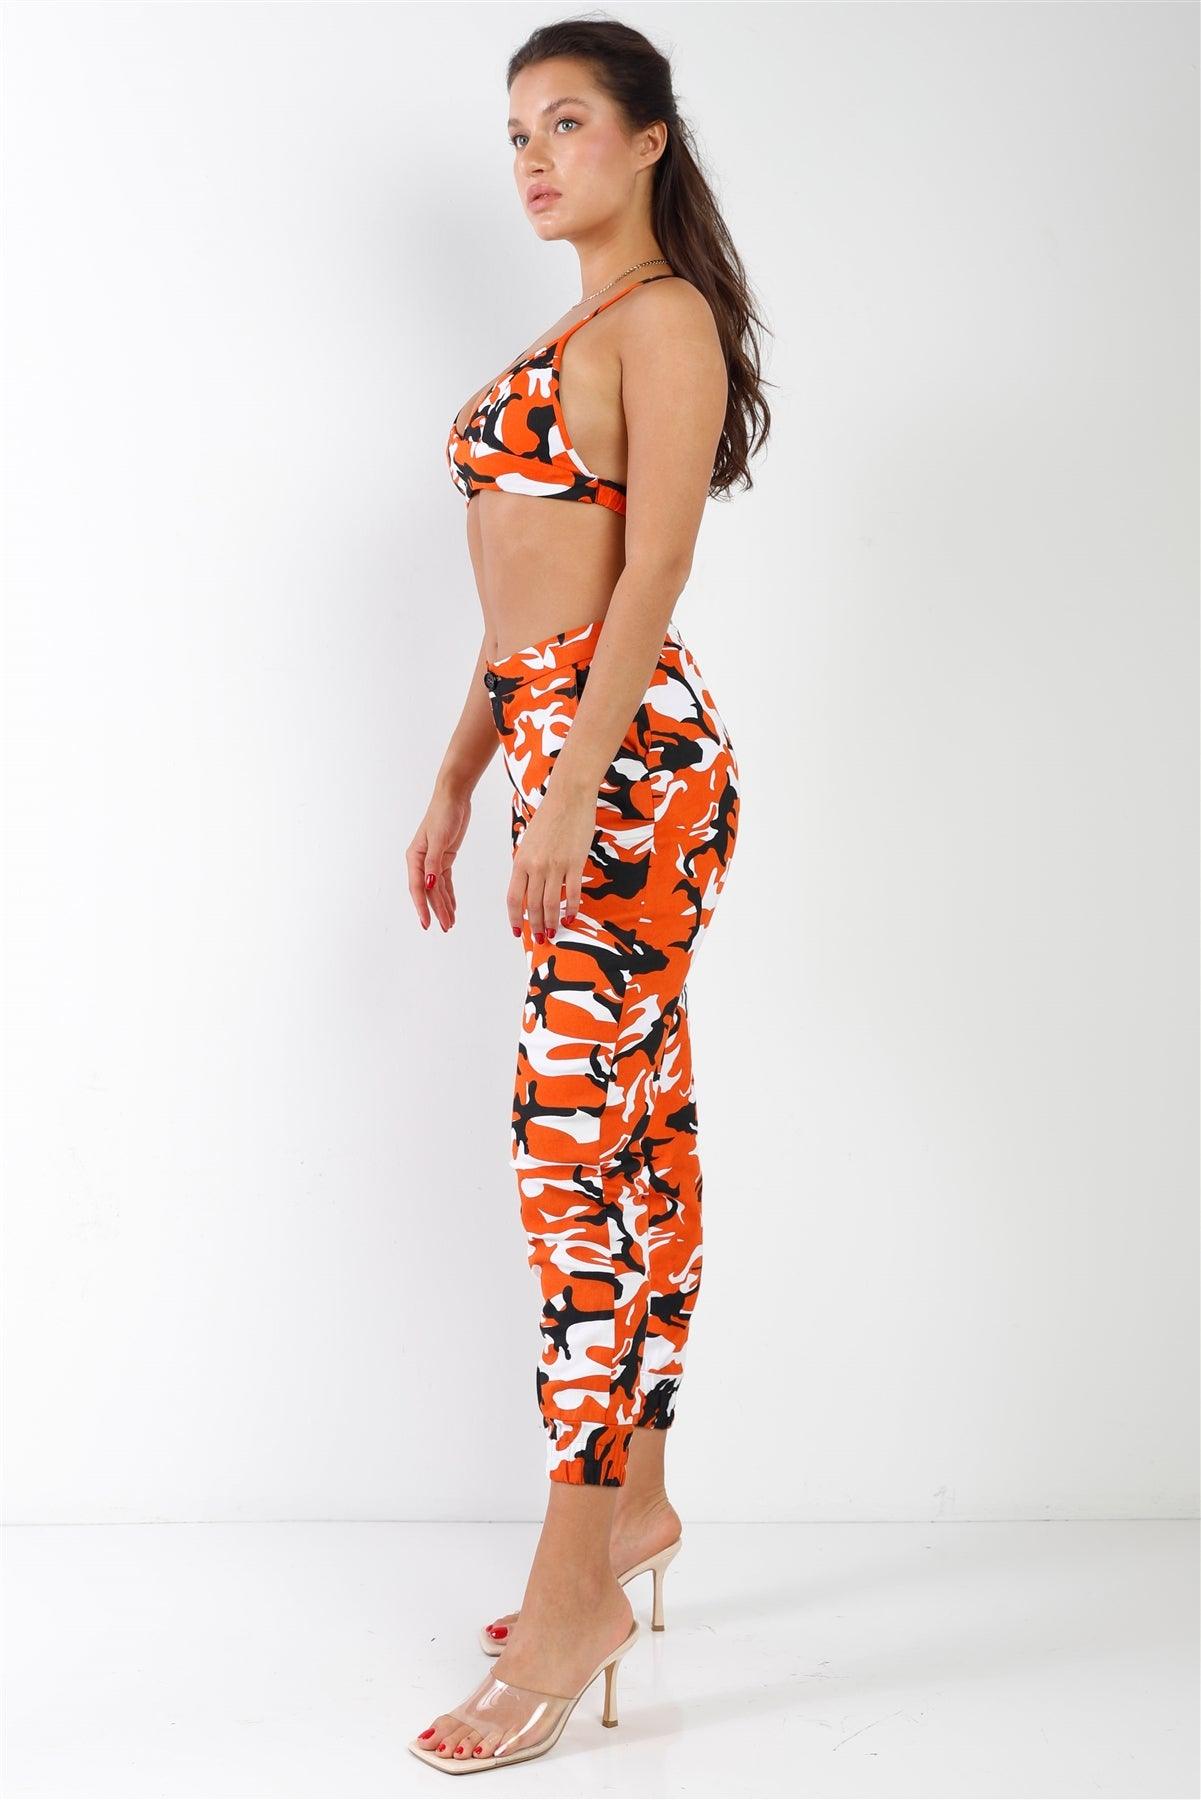 Orange Camouflage High Waisted Parachute Jogger Pant Triangle Halter Crop Top Two Piece Set